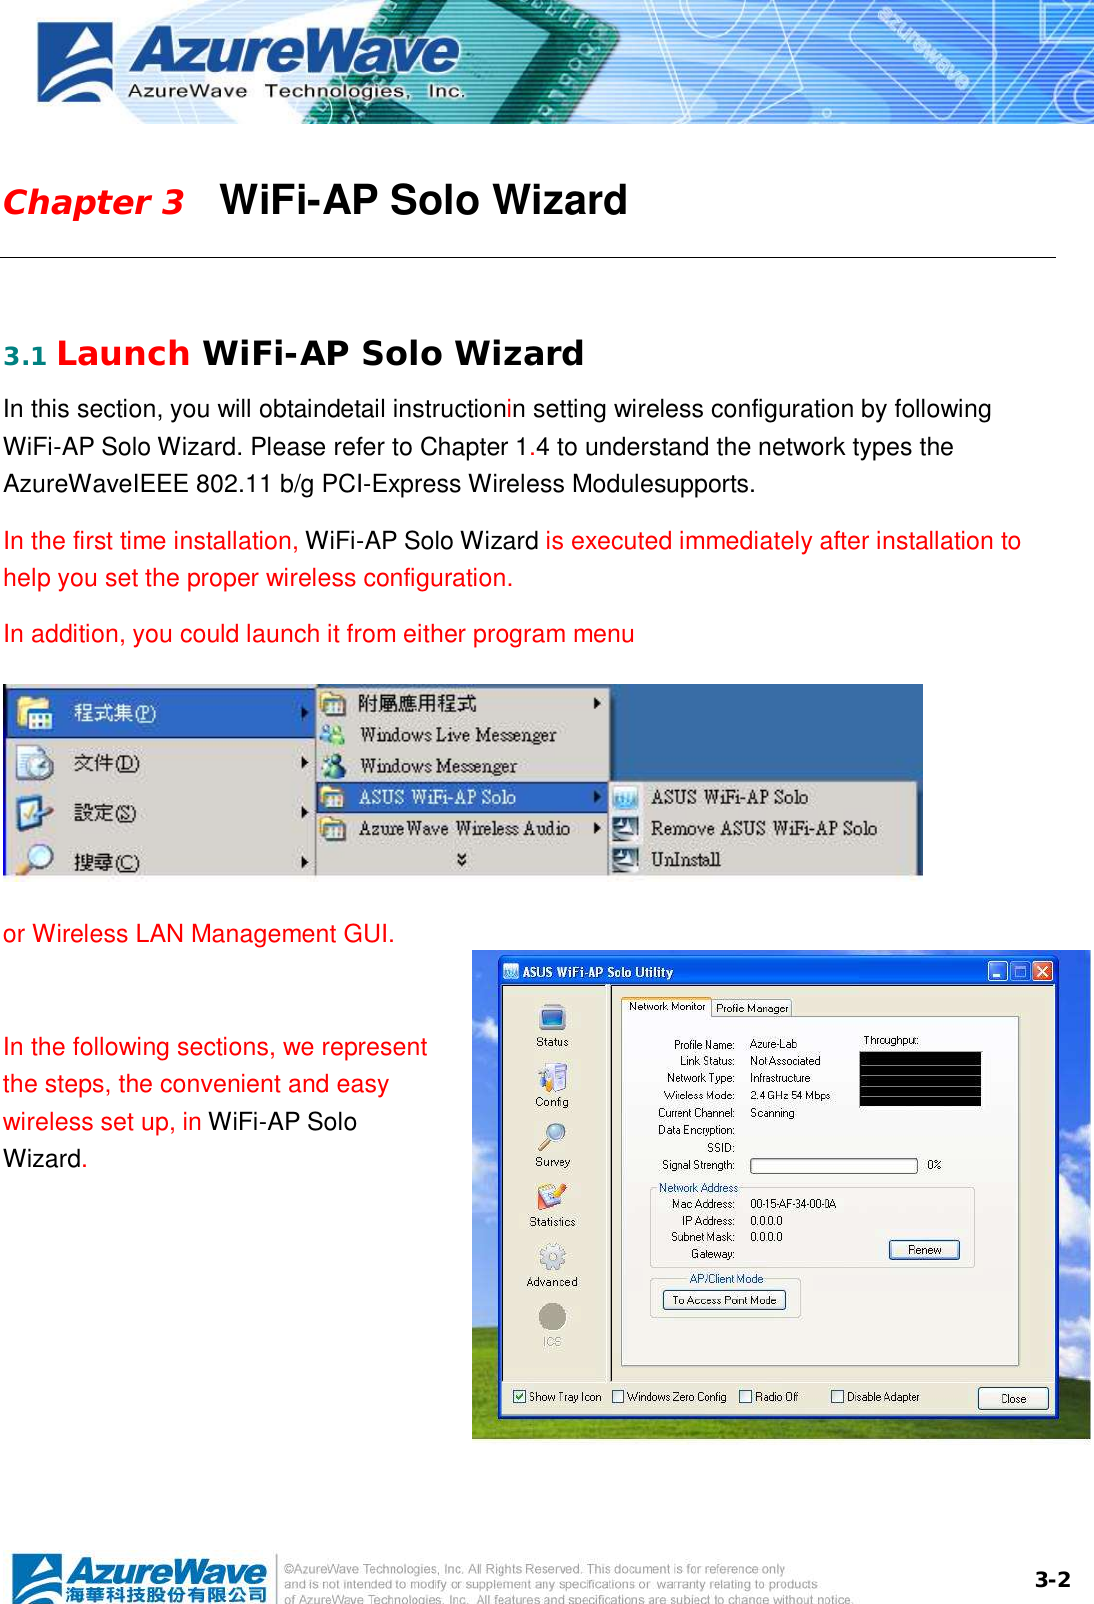  3-2Chapter 3   WiFi-AP Solo Wizard  3.1 Launch WiFi-AP Solo Wizard In this section, you will obtaindetail instructionin setting wireless configuration by following WiFi-AP Solo Wizard. Please refer to Chapter 1.4 to understand the network types the  AzureWaveIEEE 802.11 b/g PCI-Express Wireless Modulesupports. In the first time installation, WiFi-AP Solo Wizard is executed immediately after installation to help you set the proper wireless configuration.  In addition, you could launch it from either program menu    or Wireless LAN Management GUI.  In the following sections, we represent the steps, the convenient and easy wireless set up, in WiFi-AP Solo Wizard. 